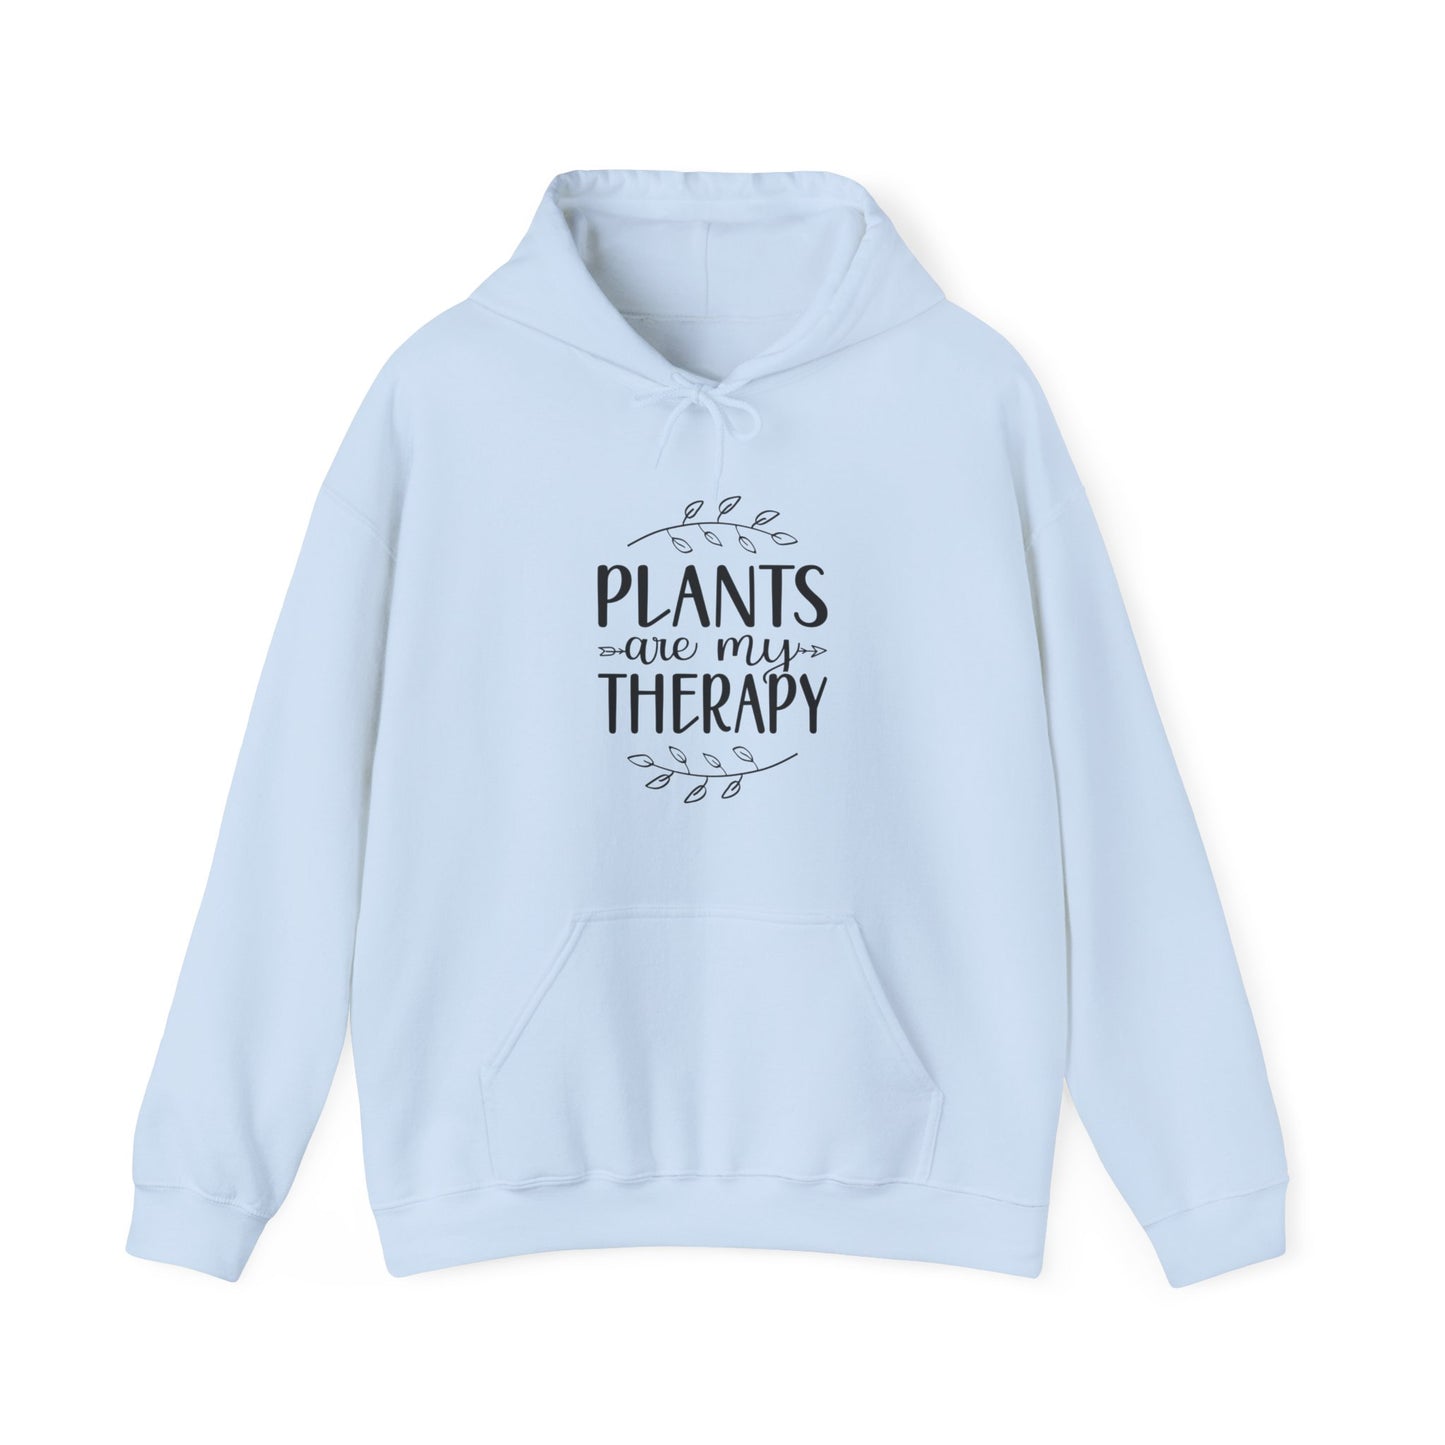 Plants are Therapy Hooded Sweatshirt (Unisex)